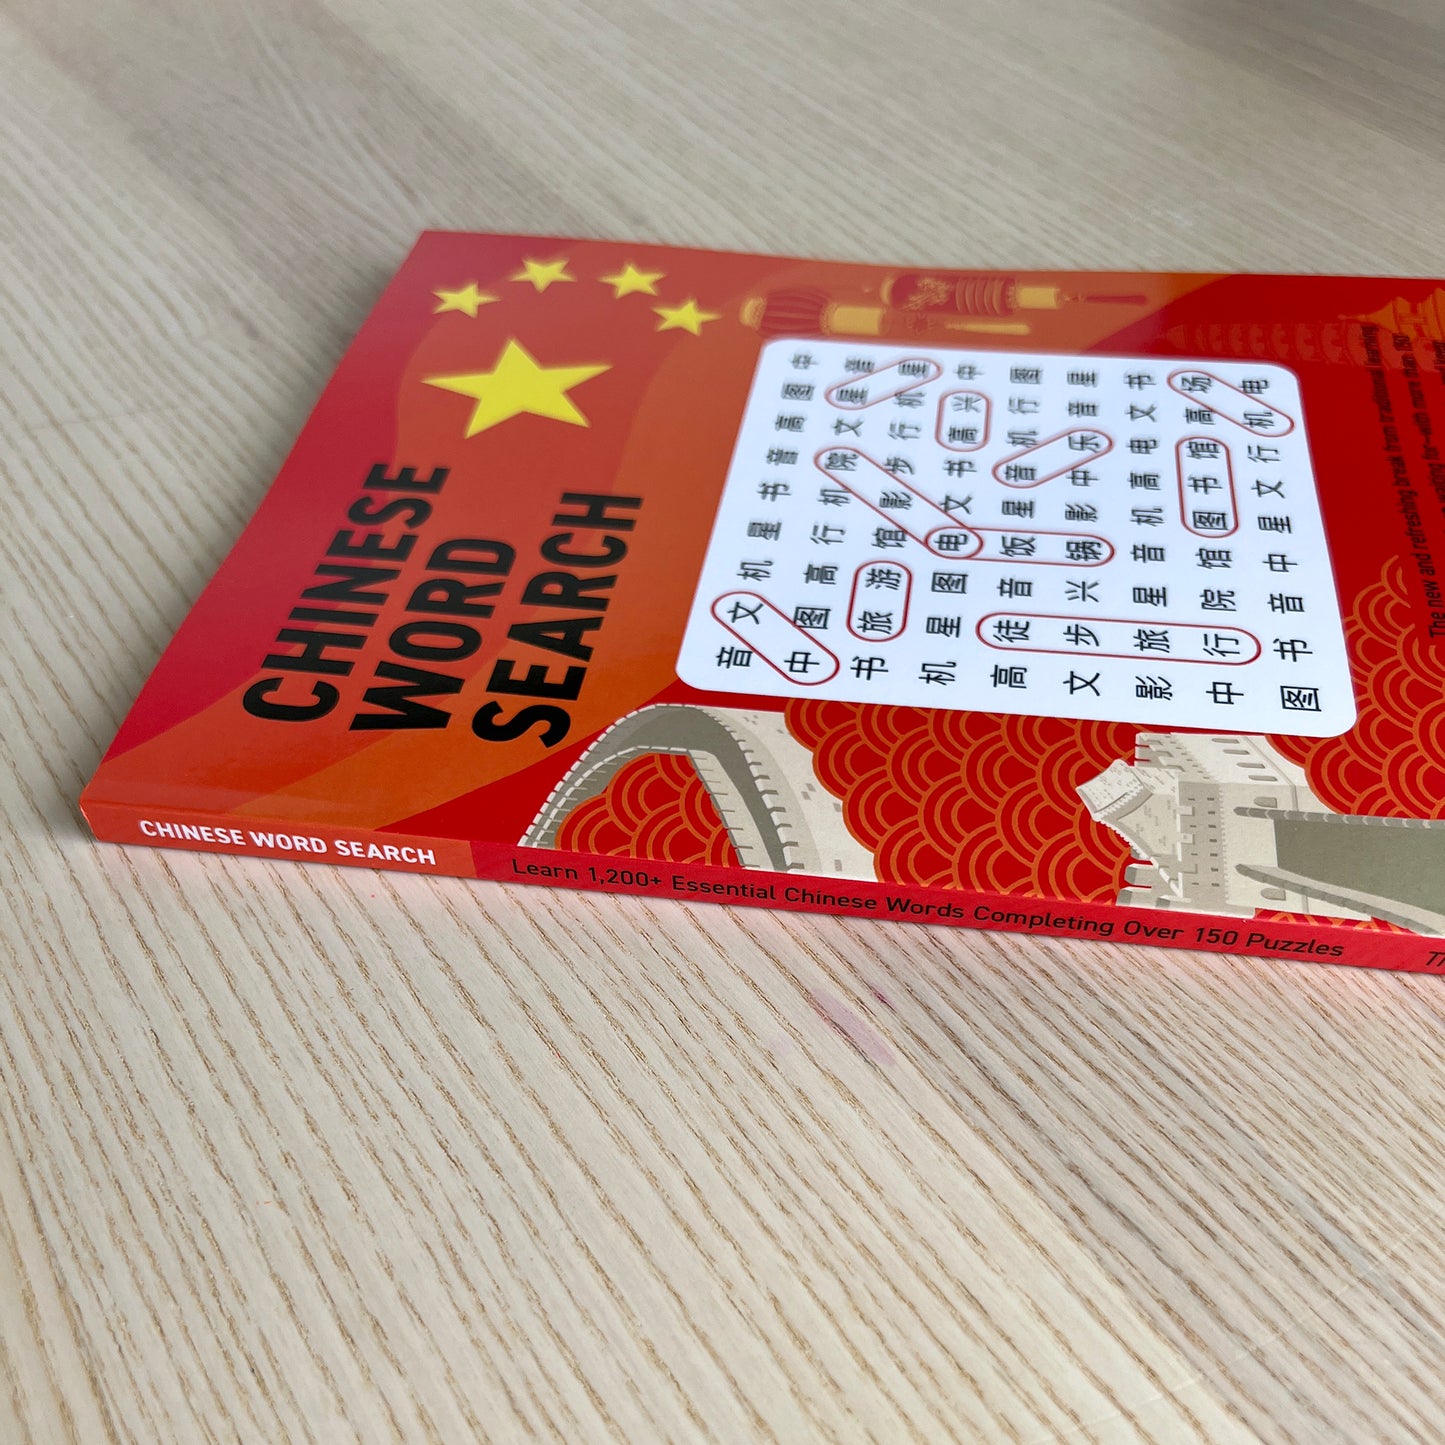 Chinese Word Search: Learn 1,200+ Essential Chinese Words Completing Over 150 Puzzles